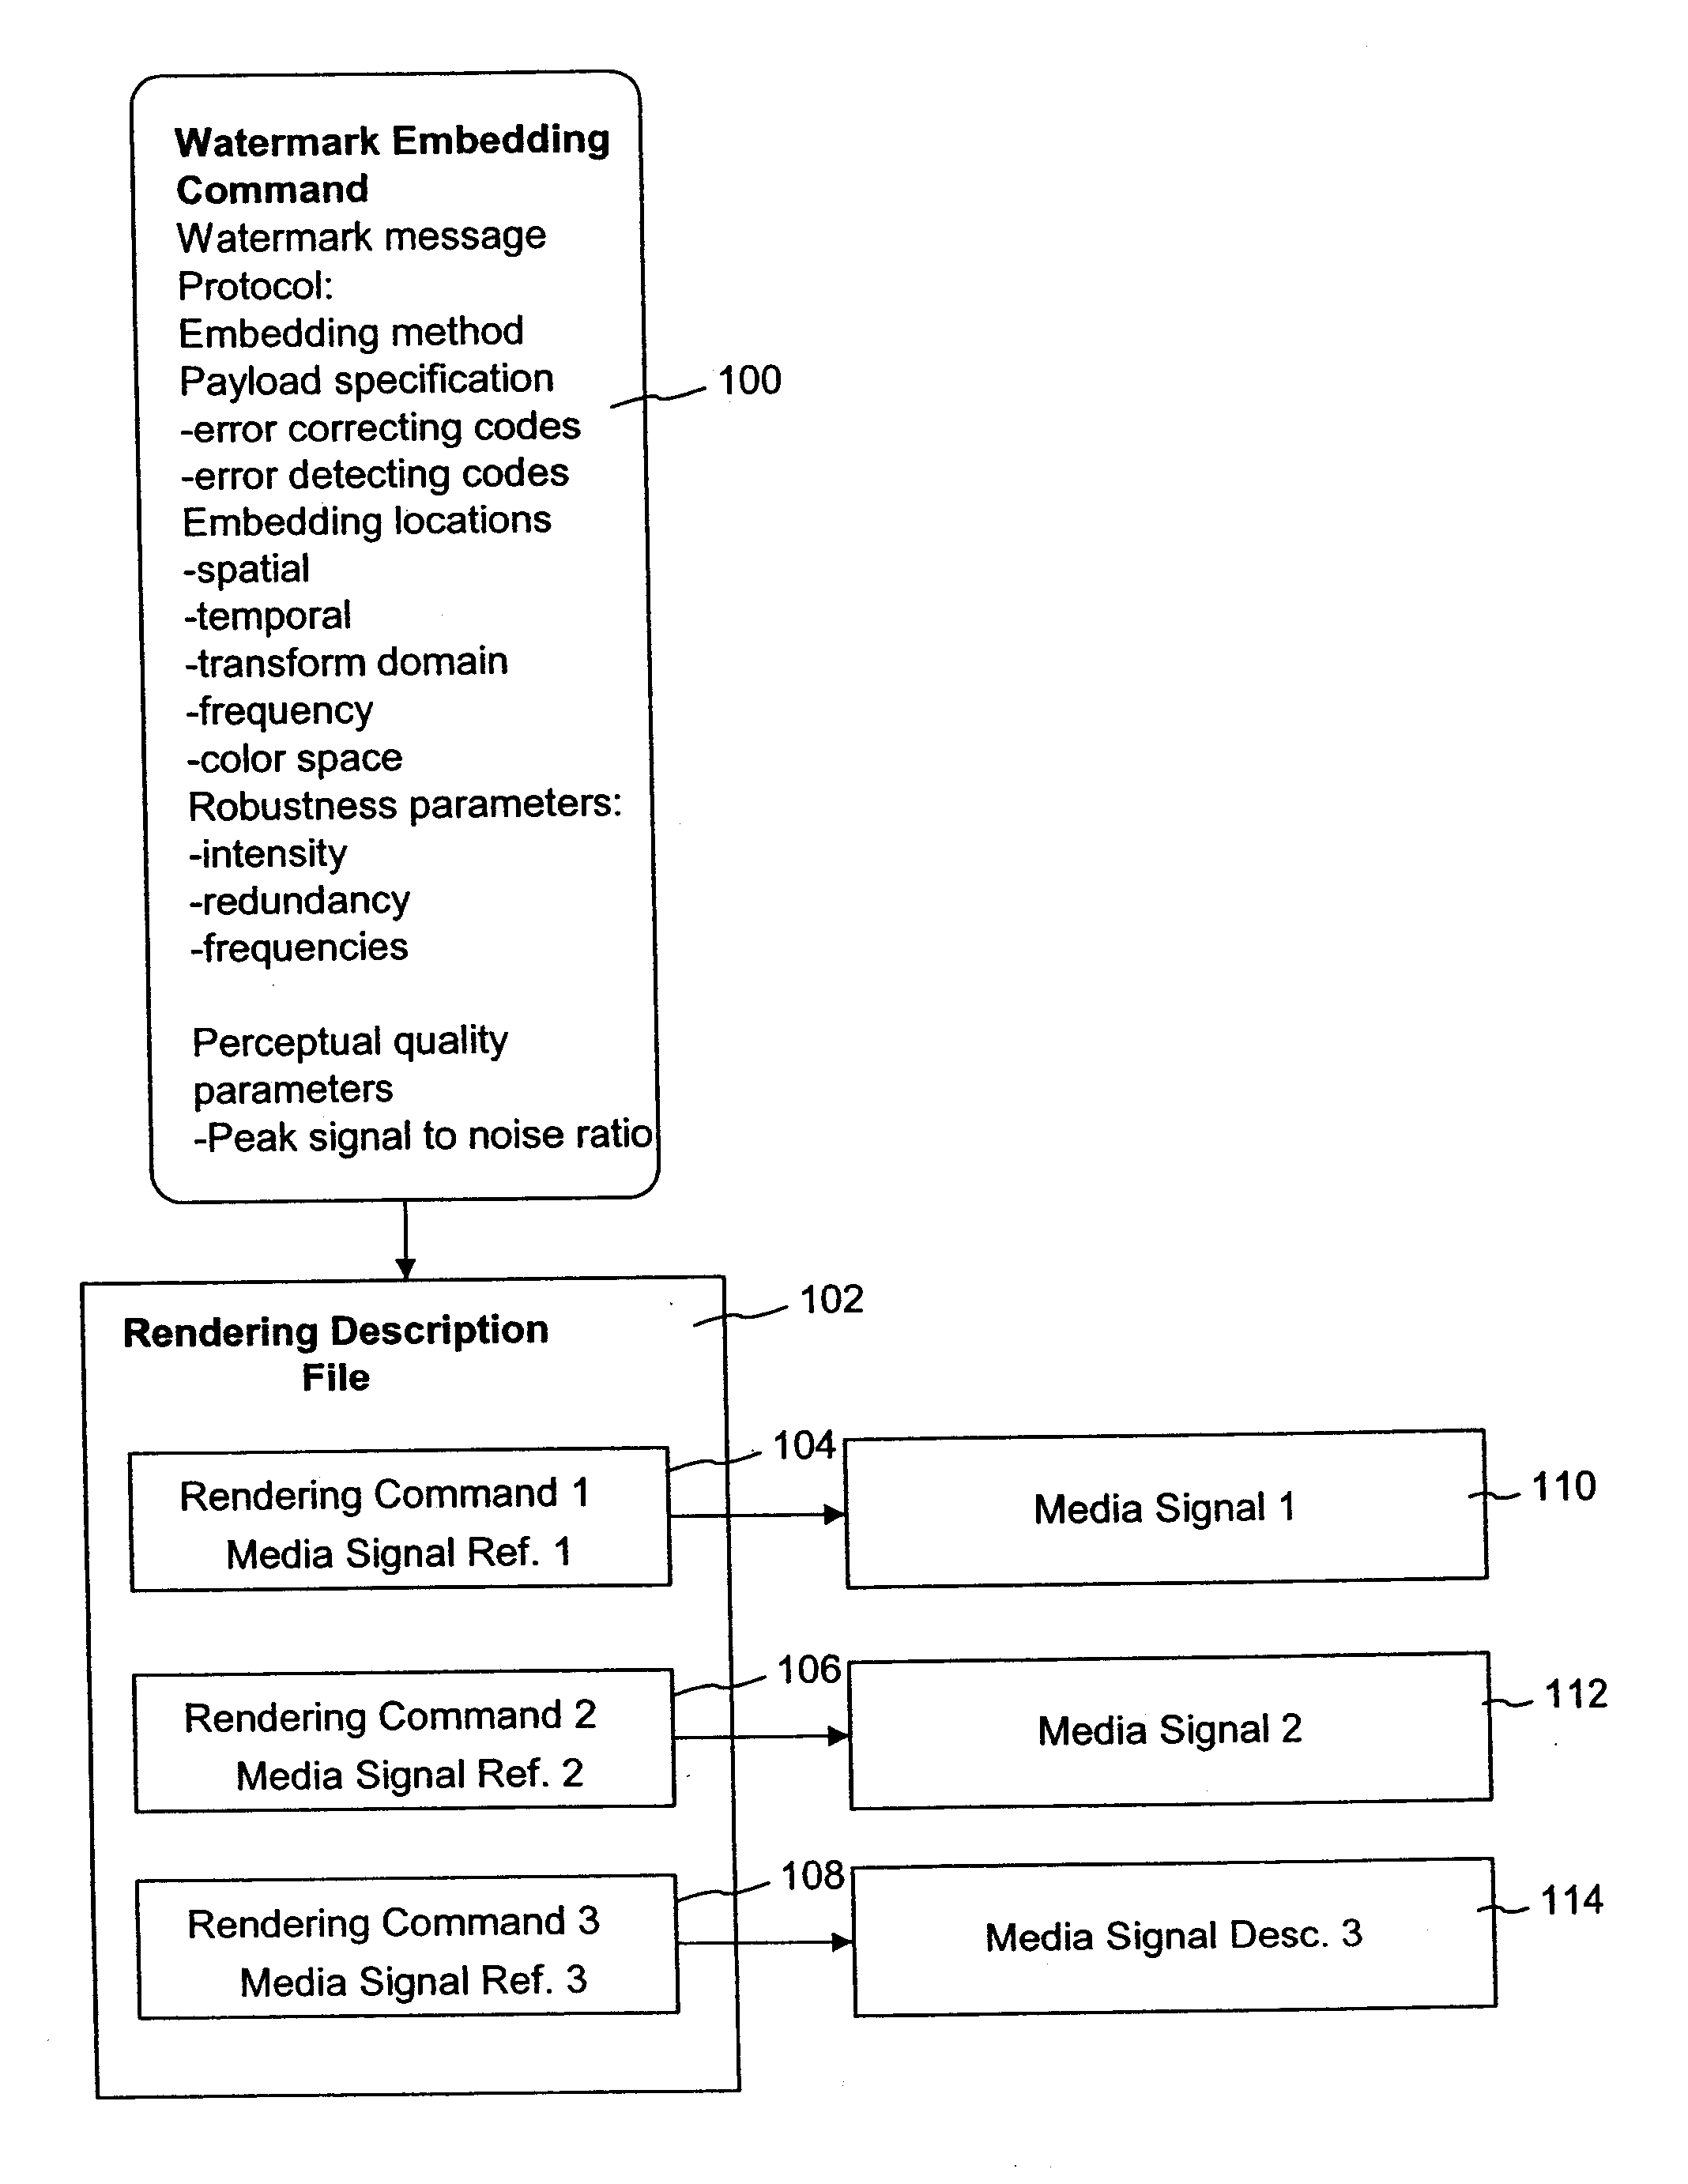 Watermark embedding functions adapted for transmission channels